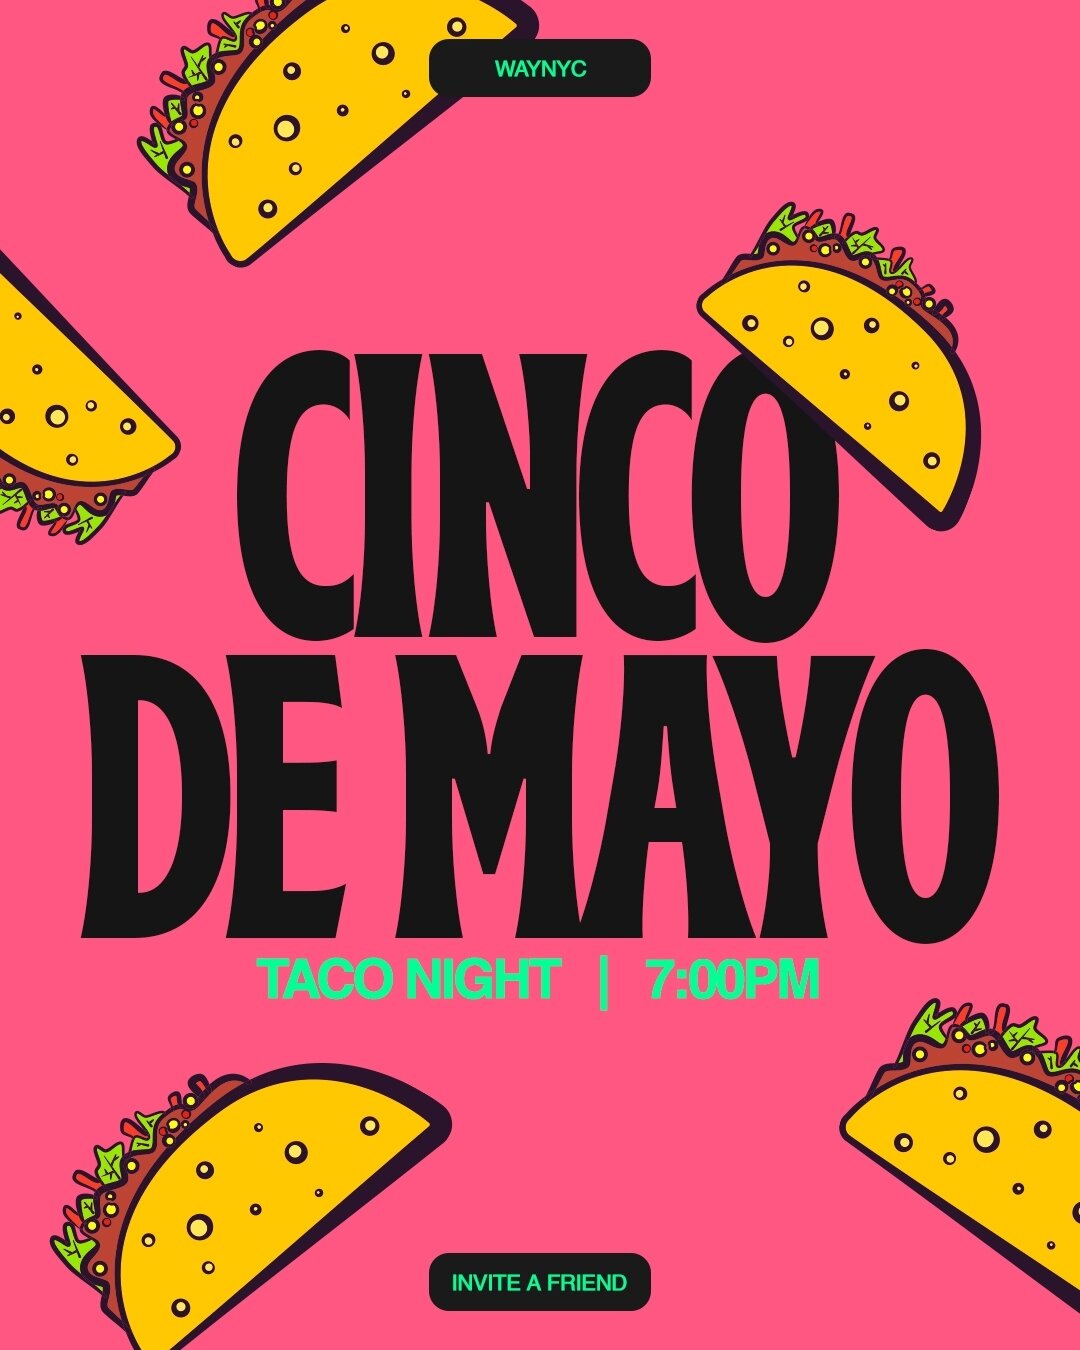 Taco Bell Takeover! It's Cinco de Mayo so we're going out for tacos at Taco Bell! Invite a friend! Hope to see you there tomorrow night! ⁠
⁠
#CincoDeMayo #TacoNight #WAYNYC #YouthNight